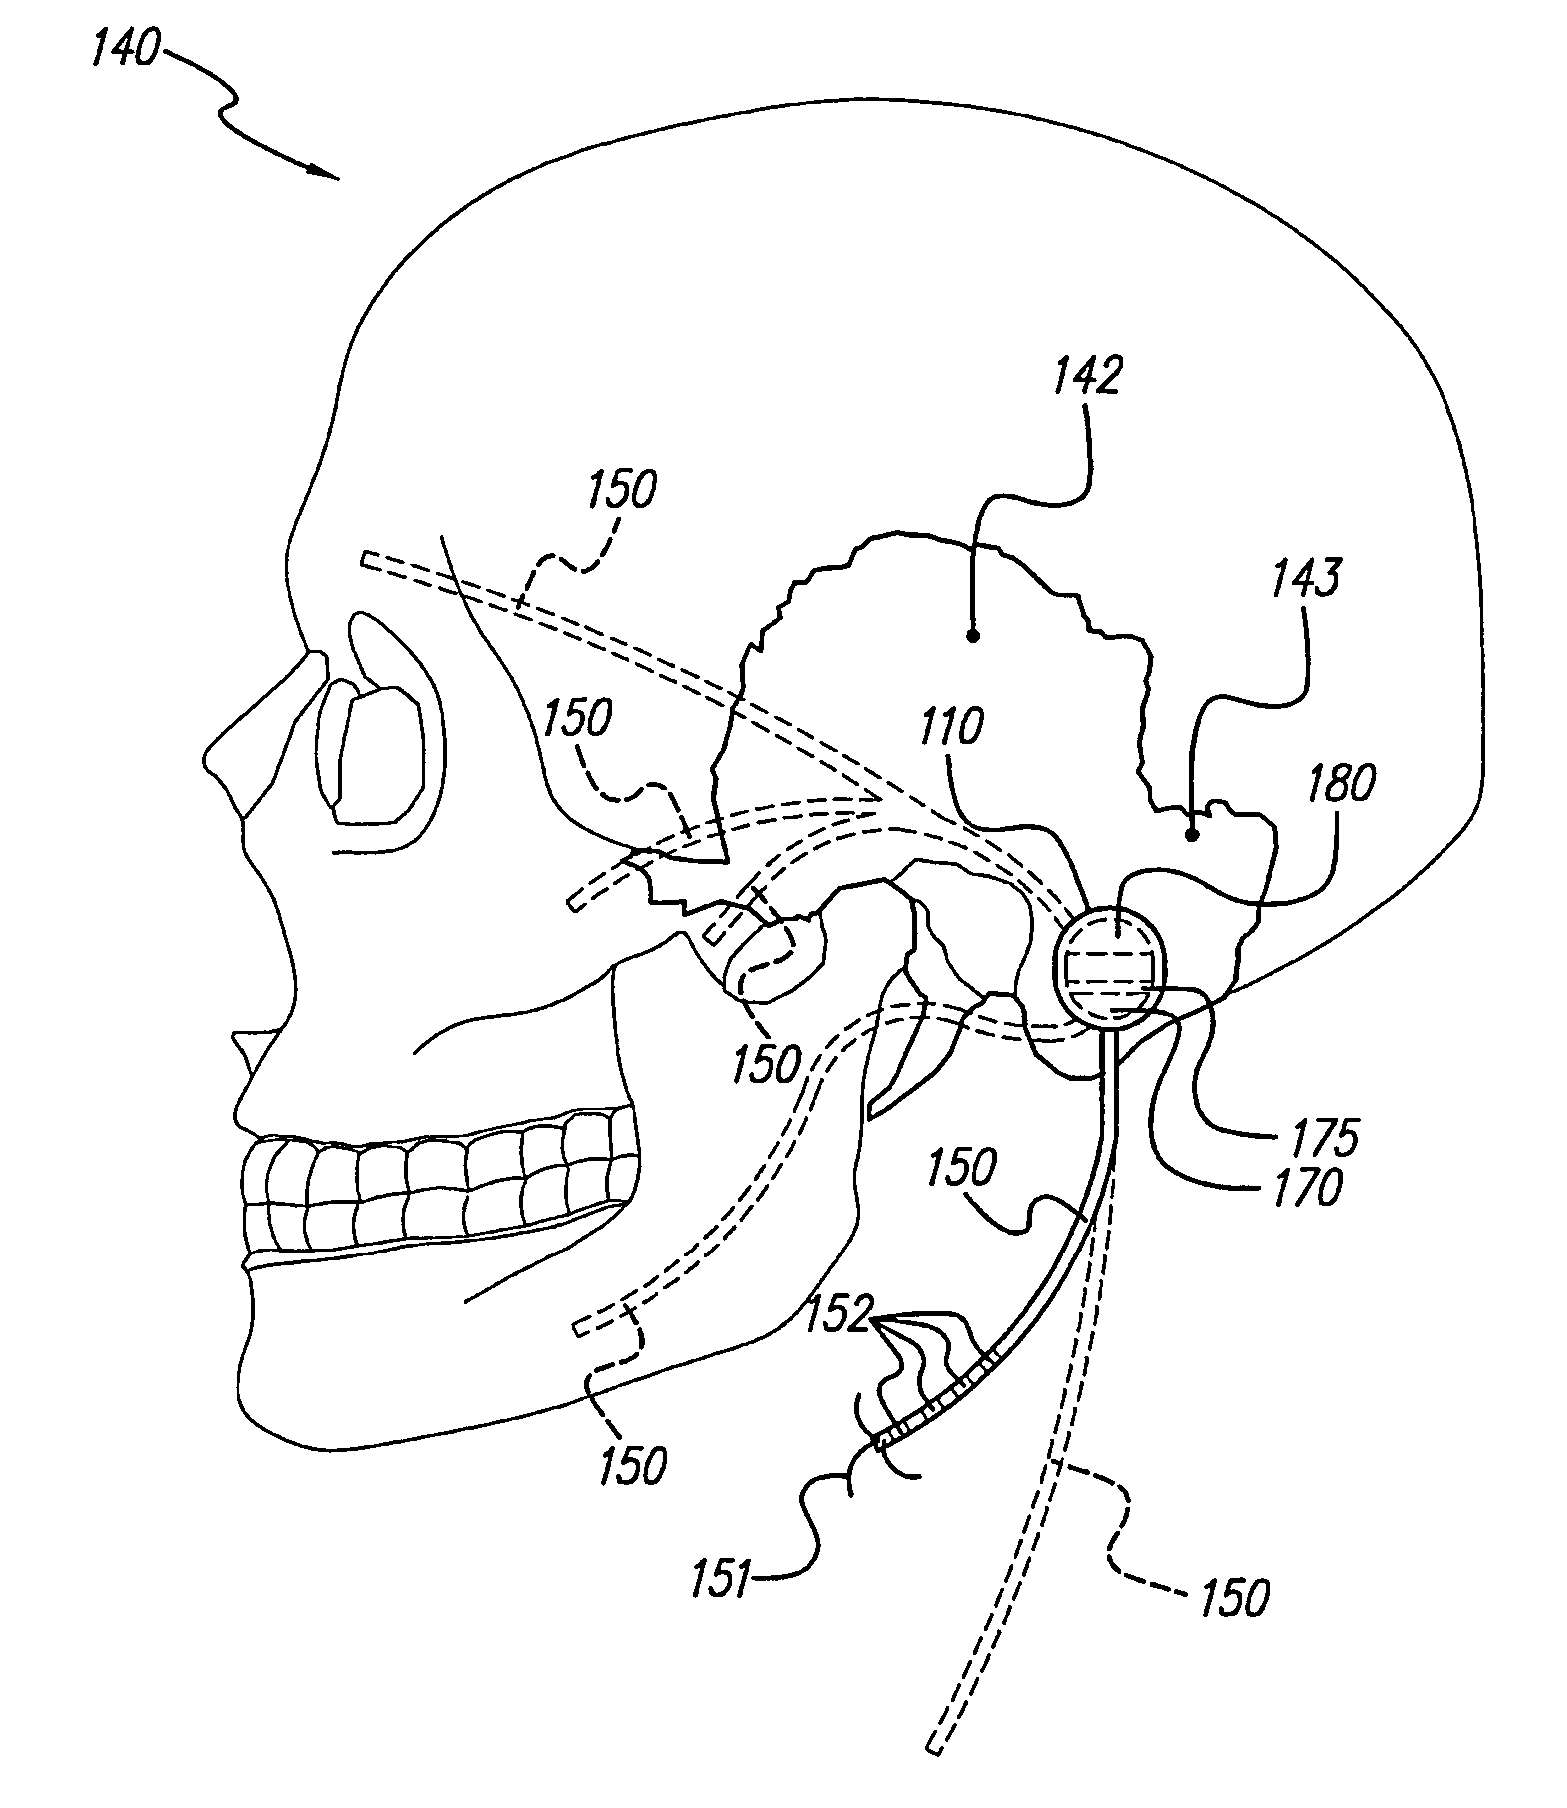 Skull-mounted electrical stimulation system and method for treating patients